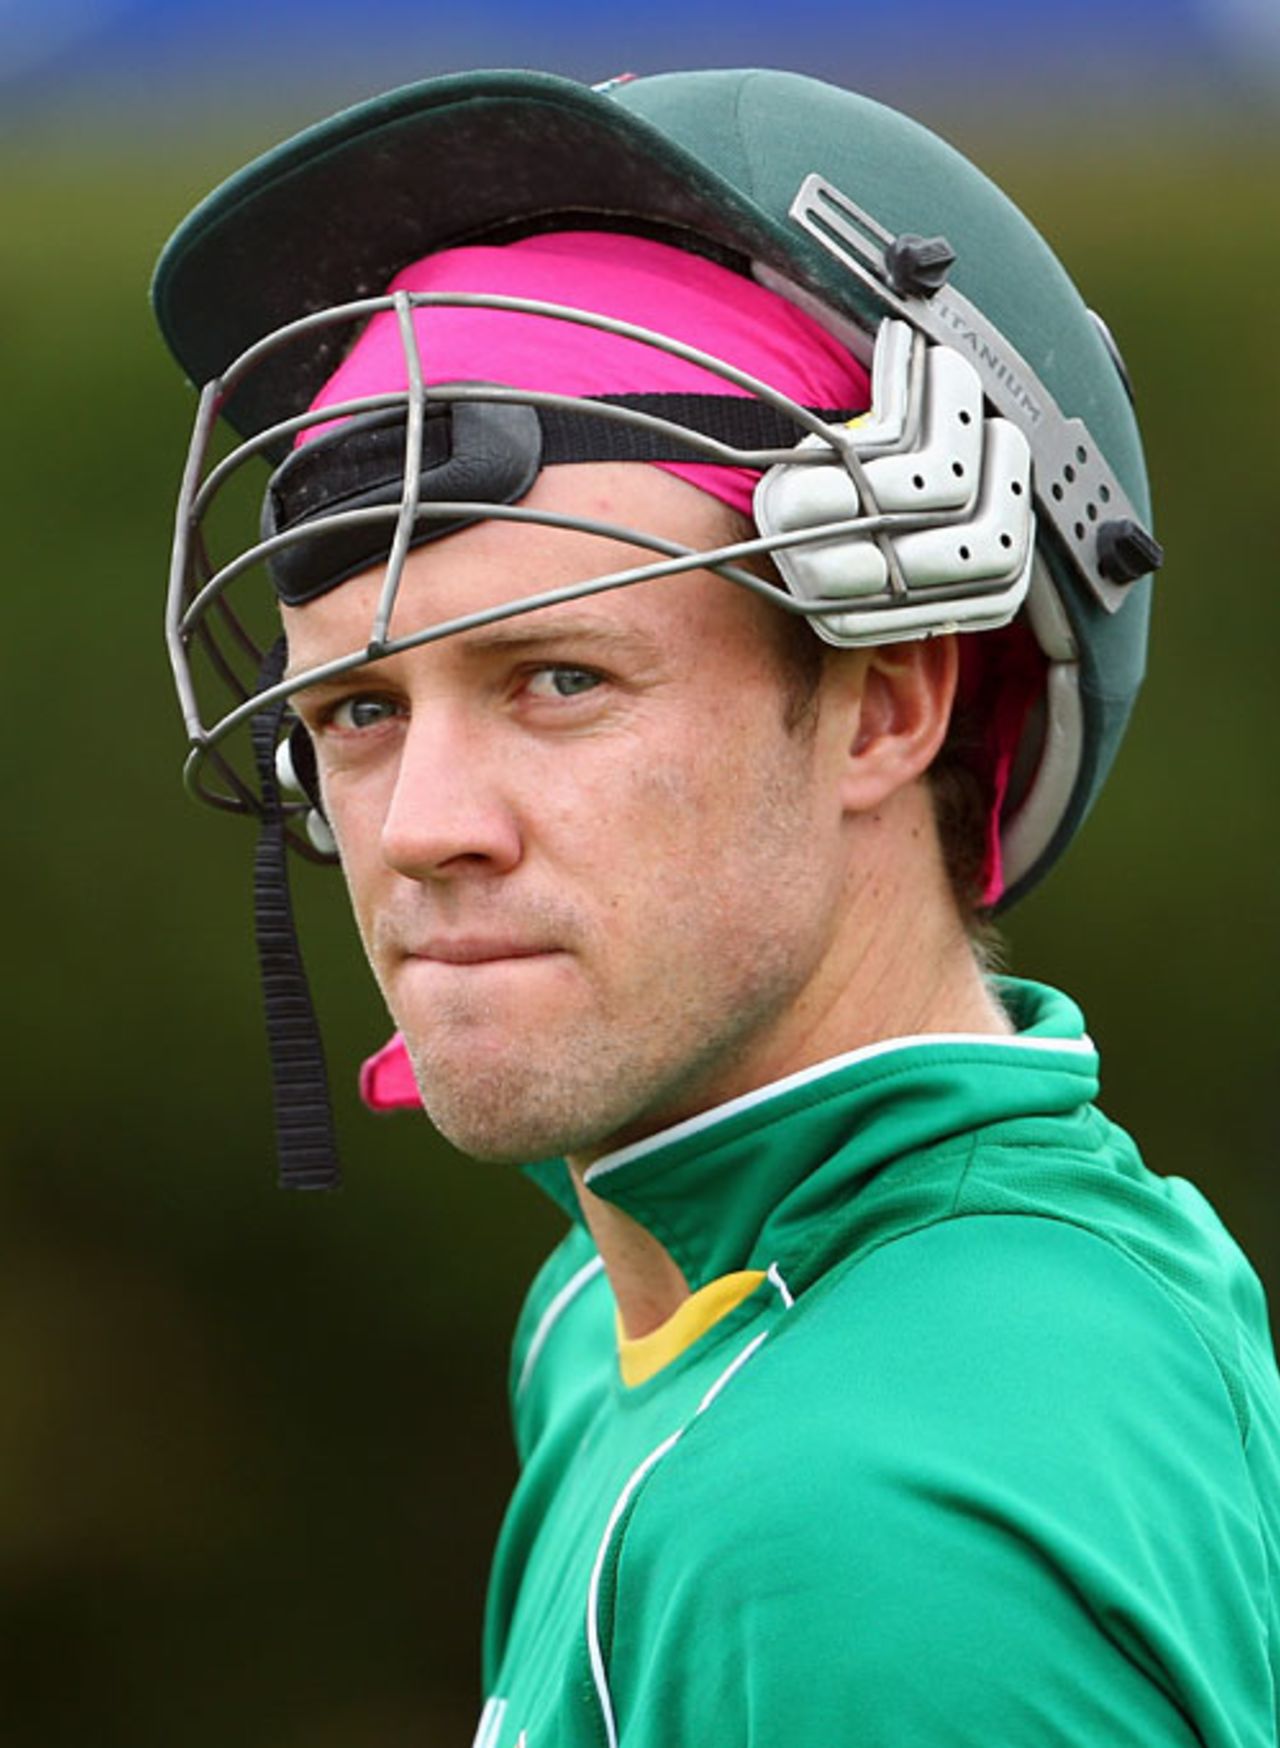 AB de Villiers waits for his turn at the nets, Sydney, January 2, 2009